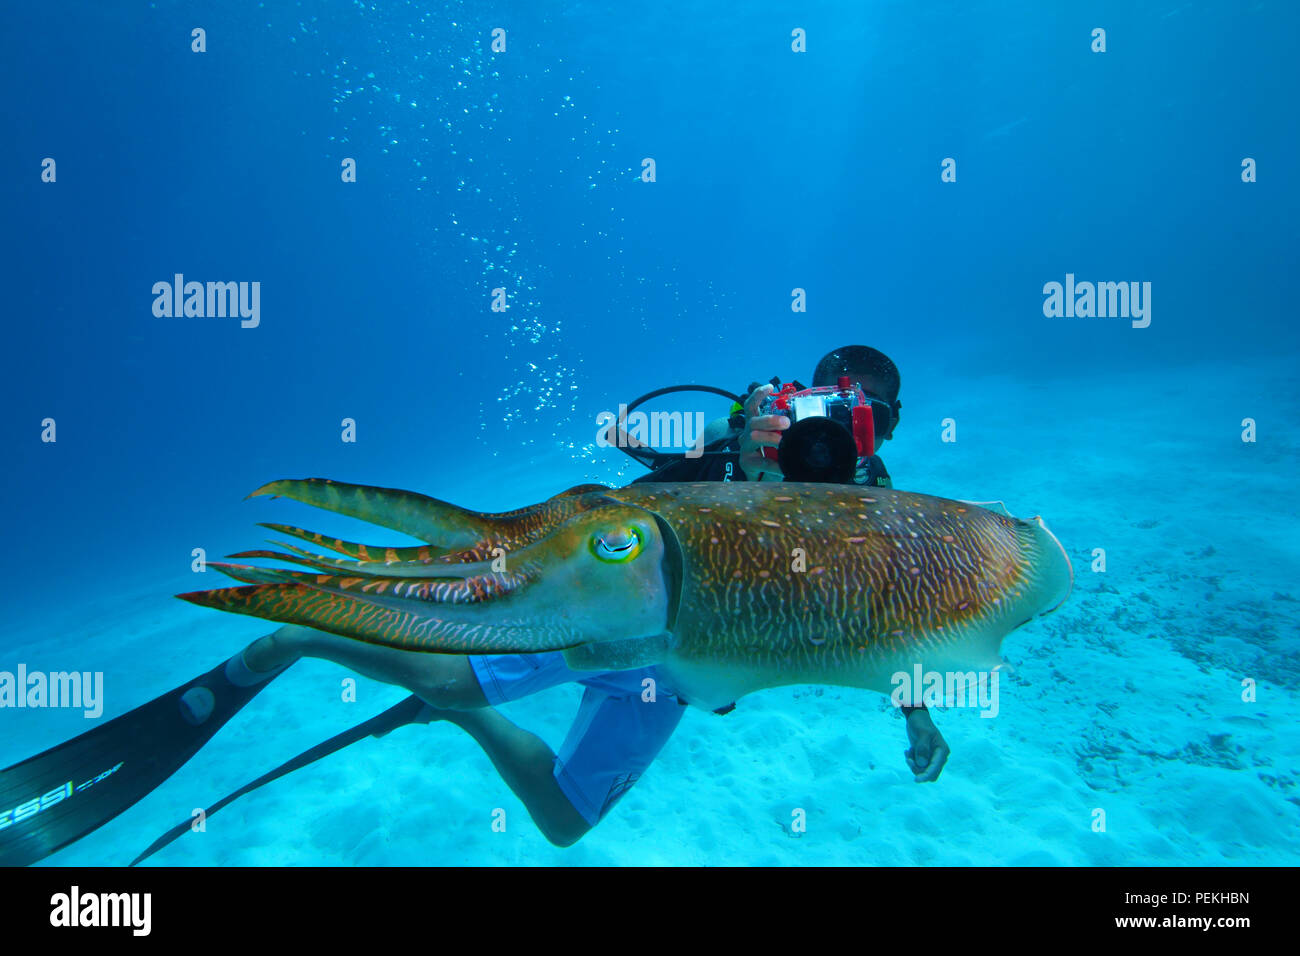 Diver (MR) with an underwater camera, photographing a common cuttlefish, Sepia officinalis, in Palau, Micronesia. Stock Photo